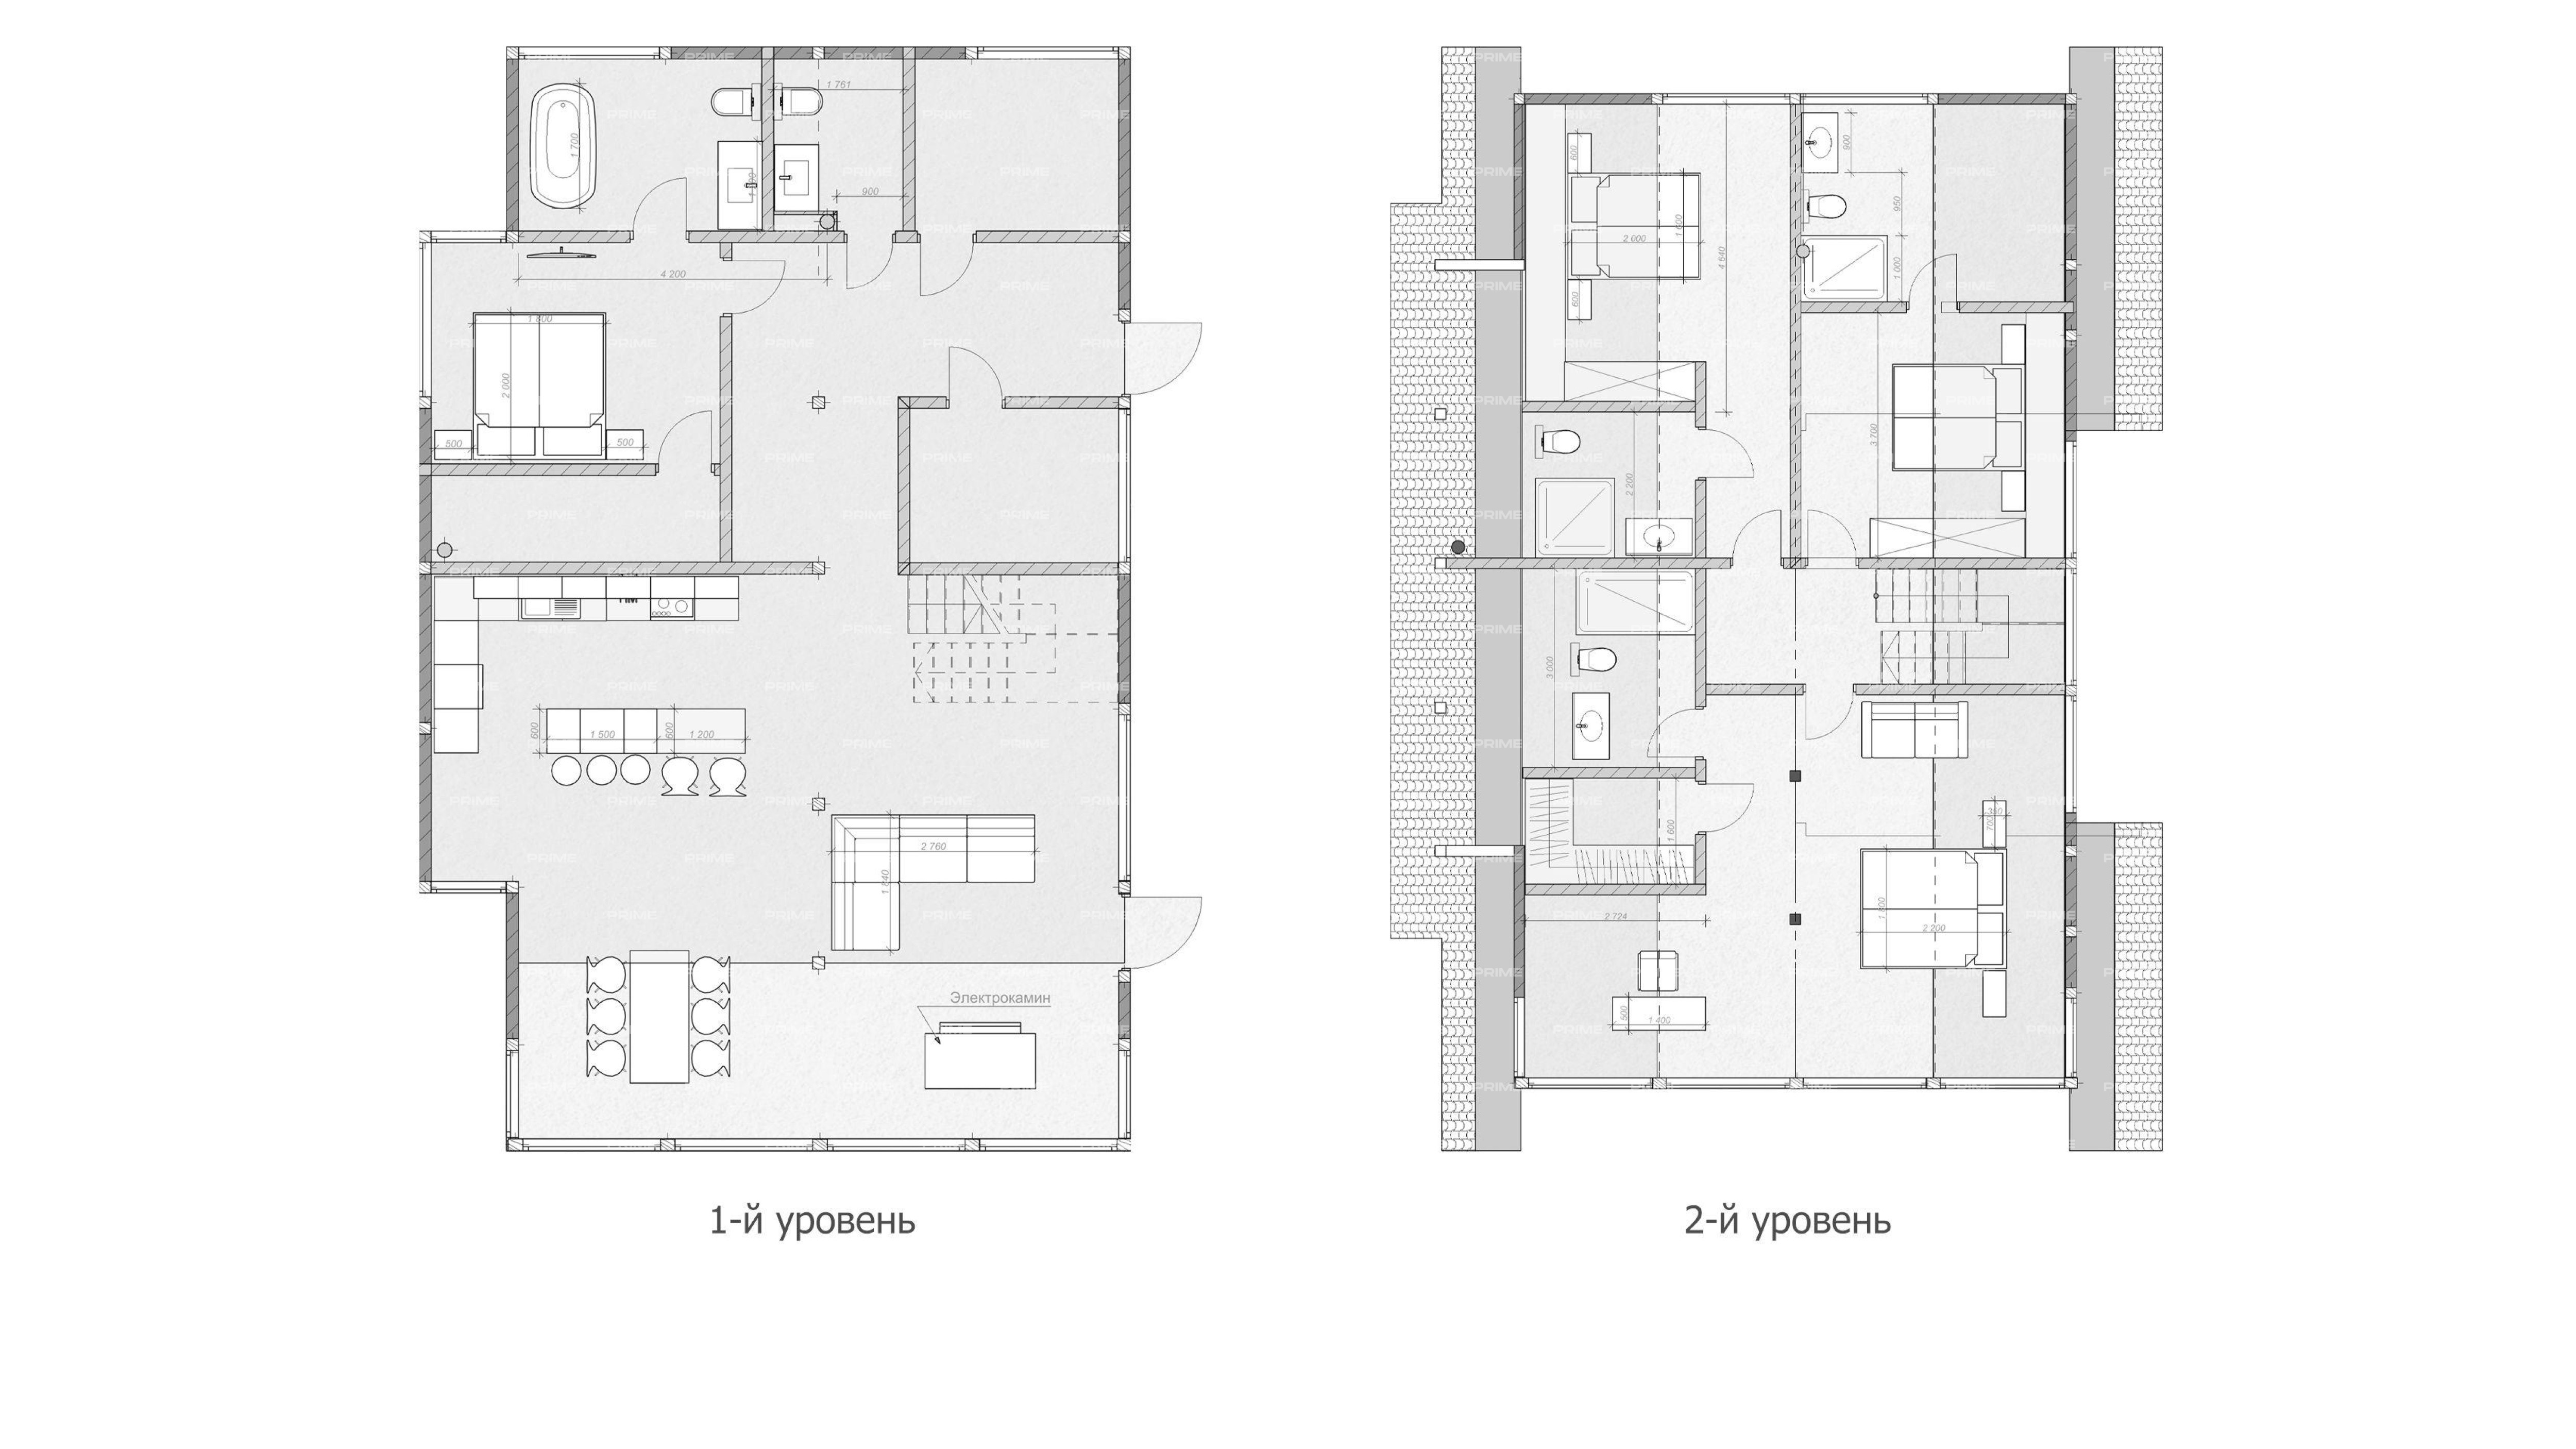 Layout picture Сountry нouse with 4 bedrooms 308 m2 in village Stepanovskoe. Cottage development